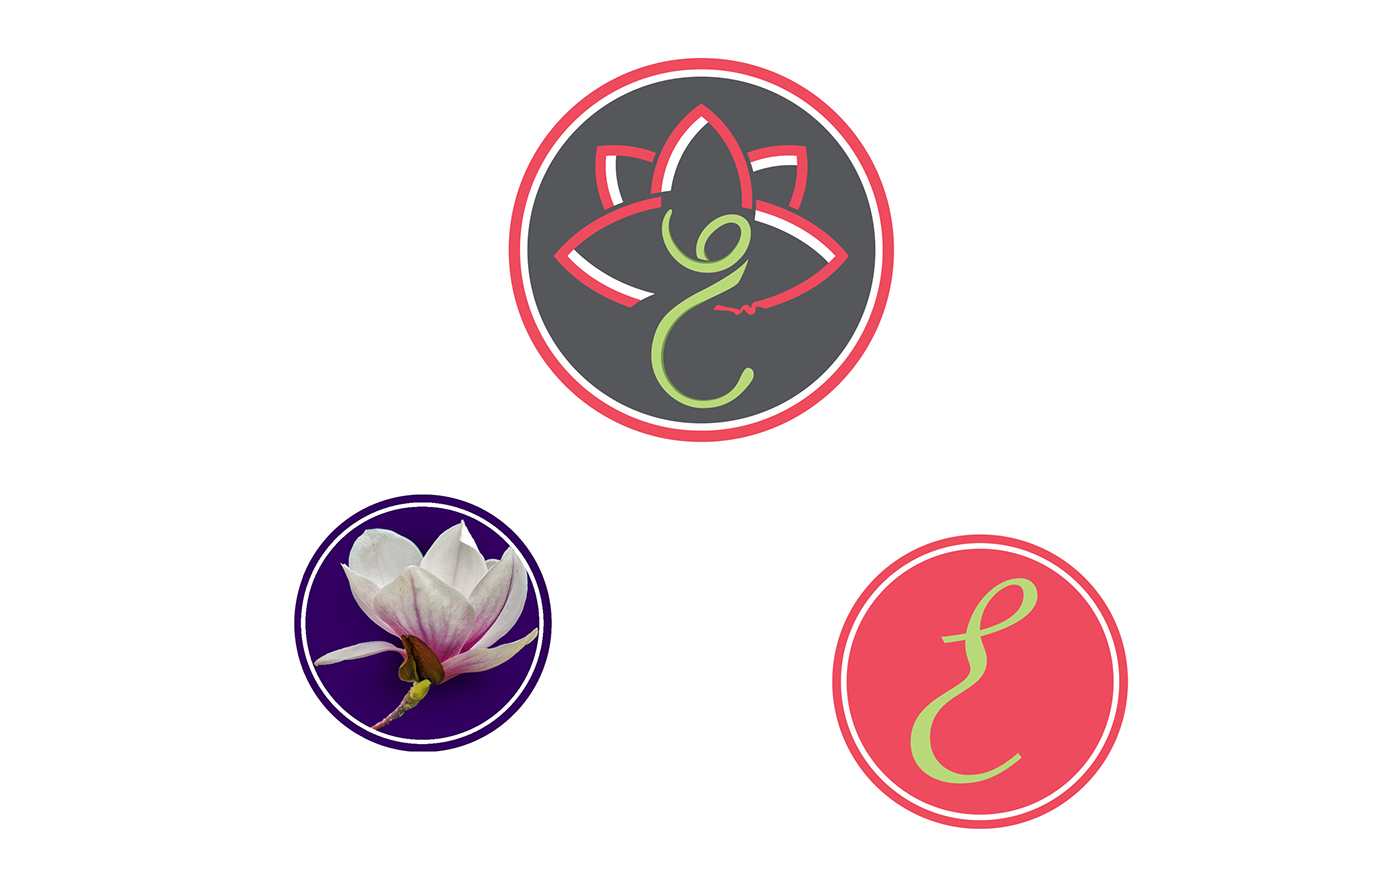 Shows the progression of the logo from a magnolia flower and letter e.